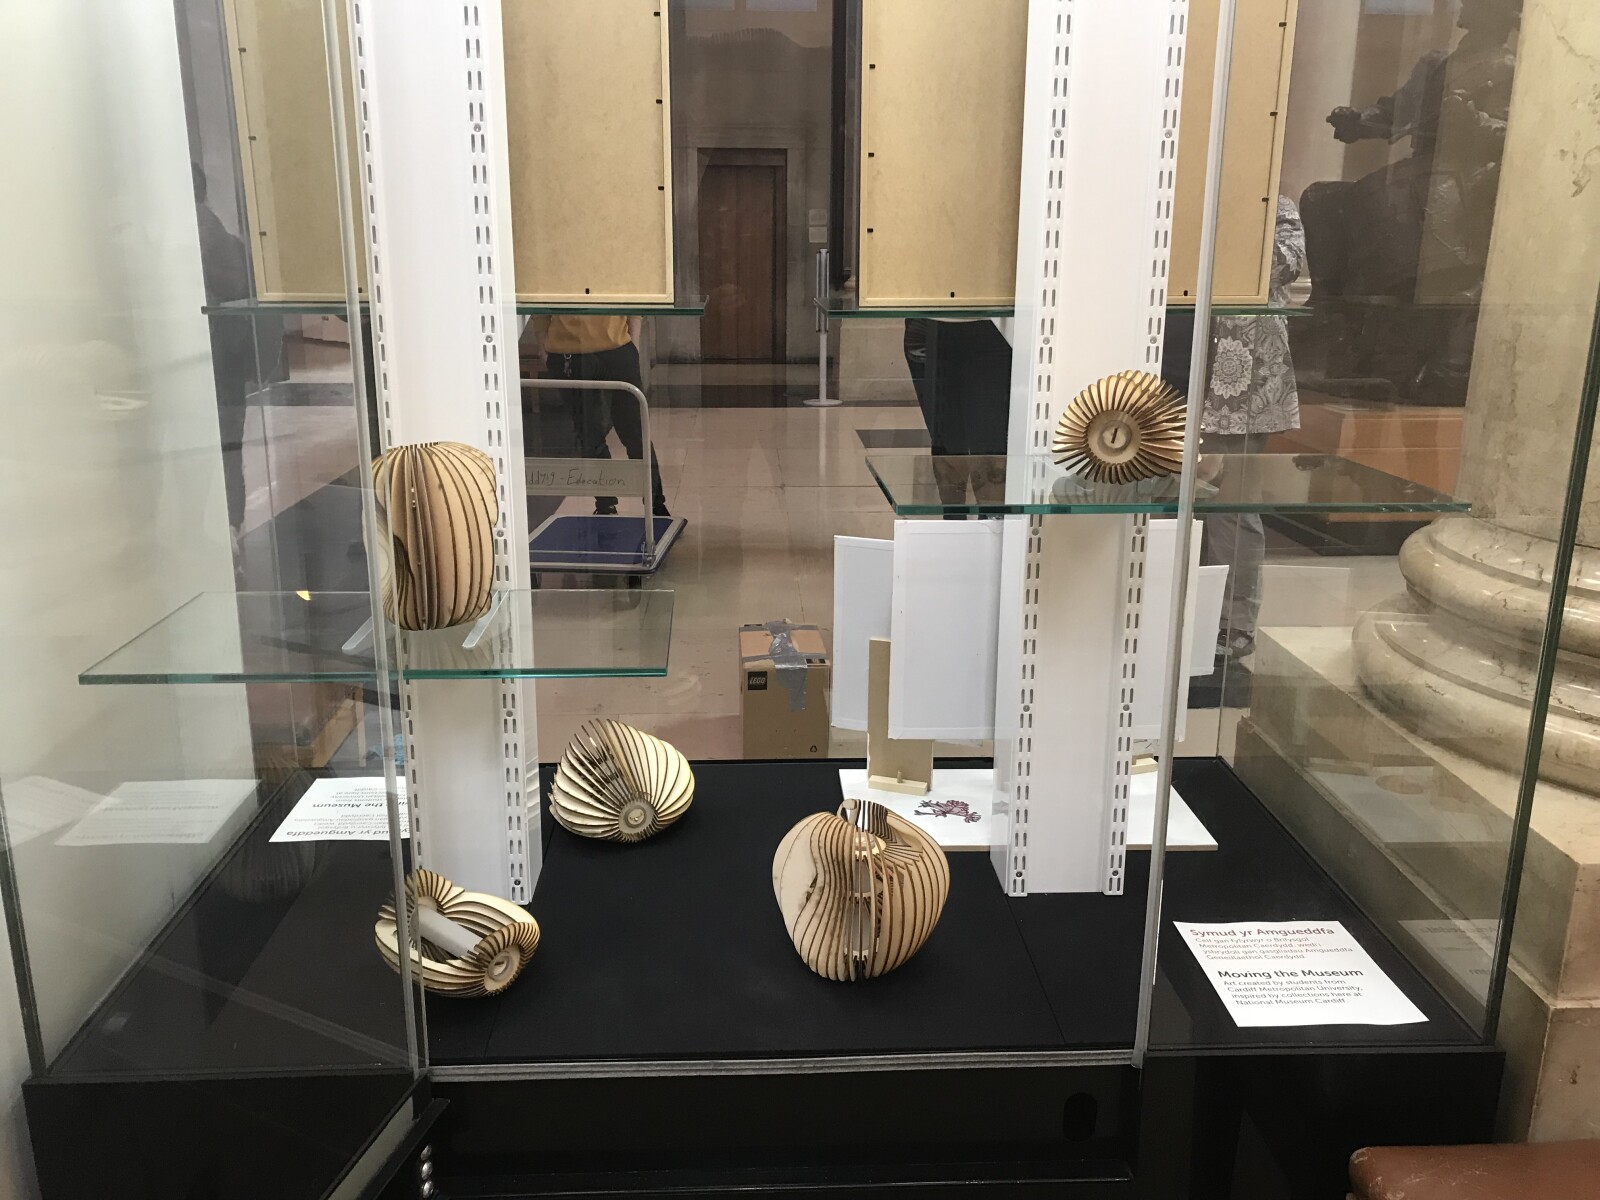 Photo of slatted wooden light shades in a display case